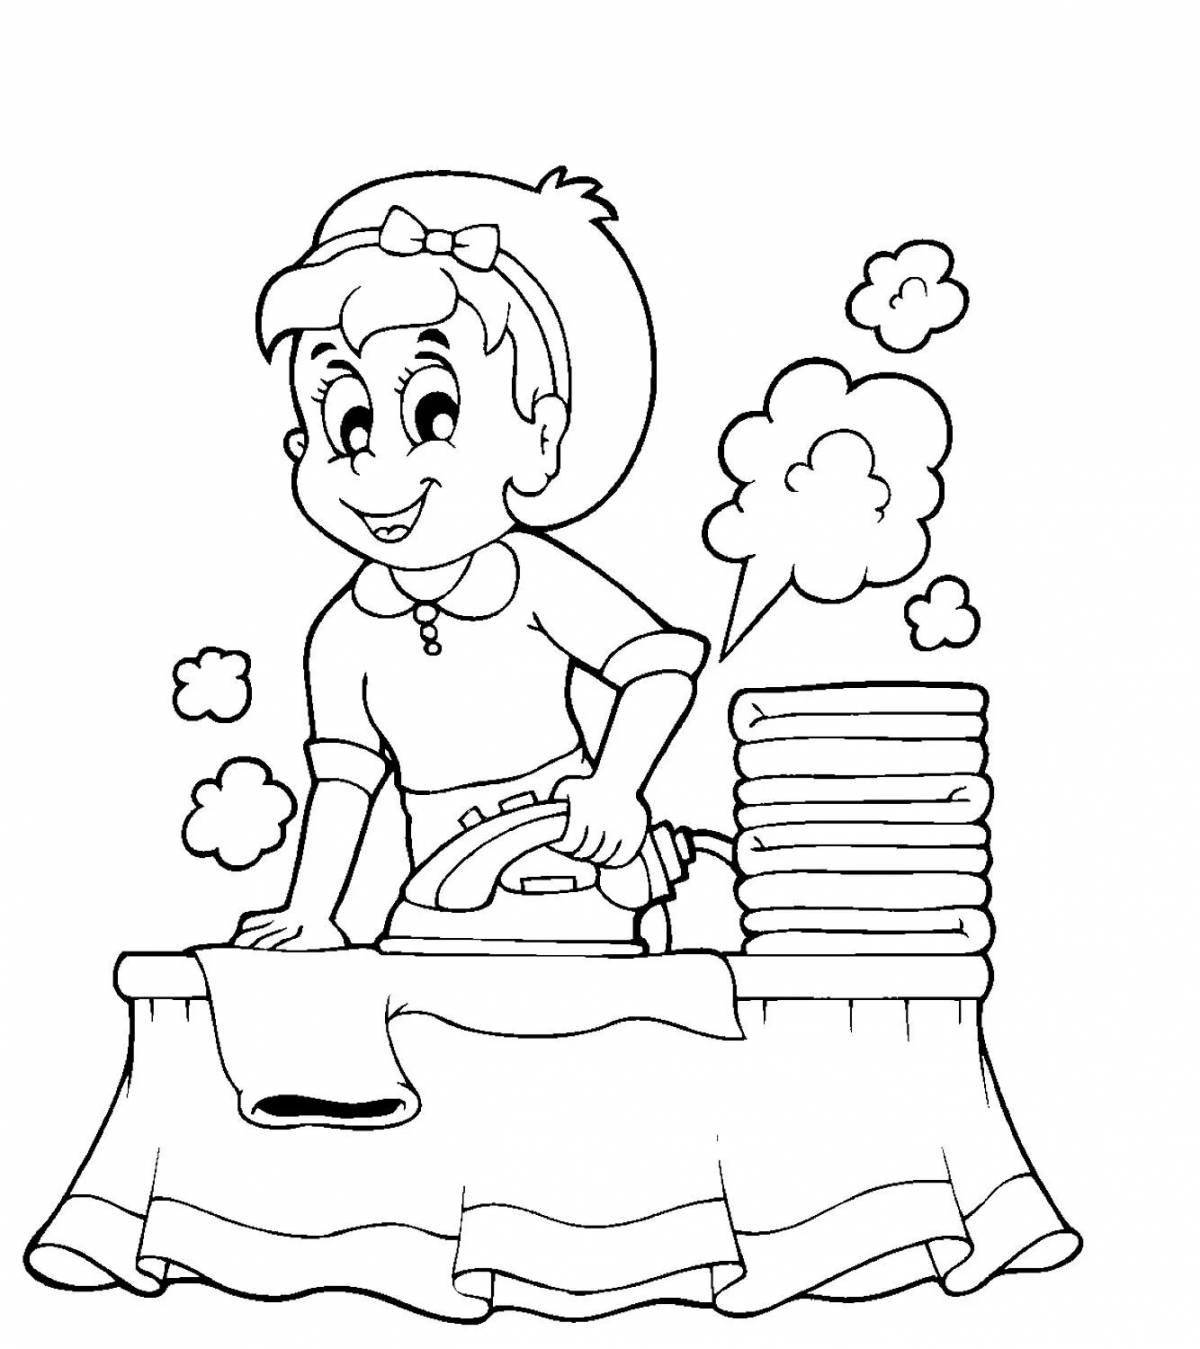 Coloring page holiday housewife